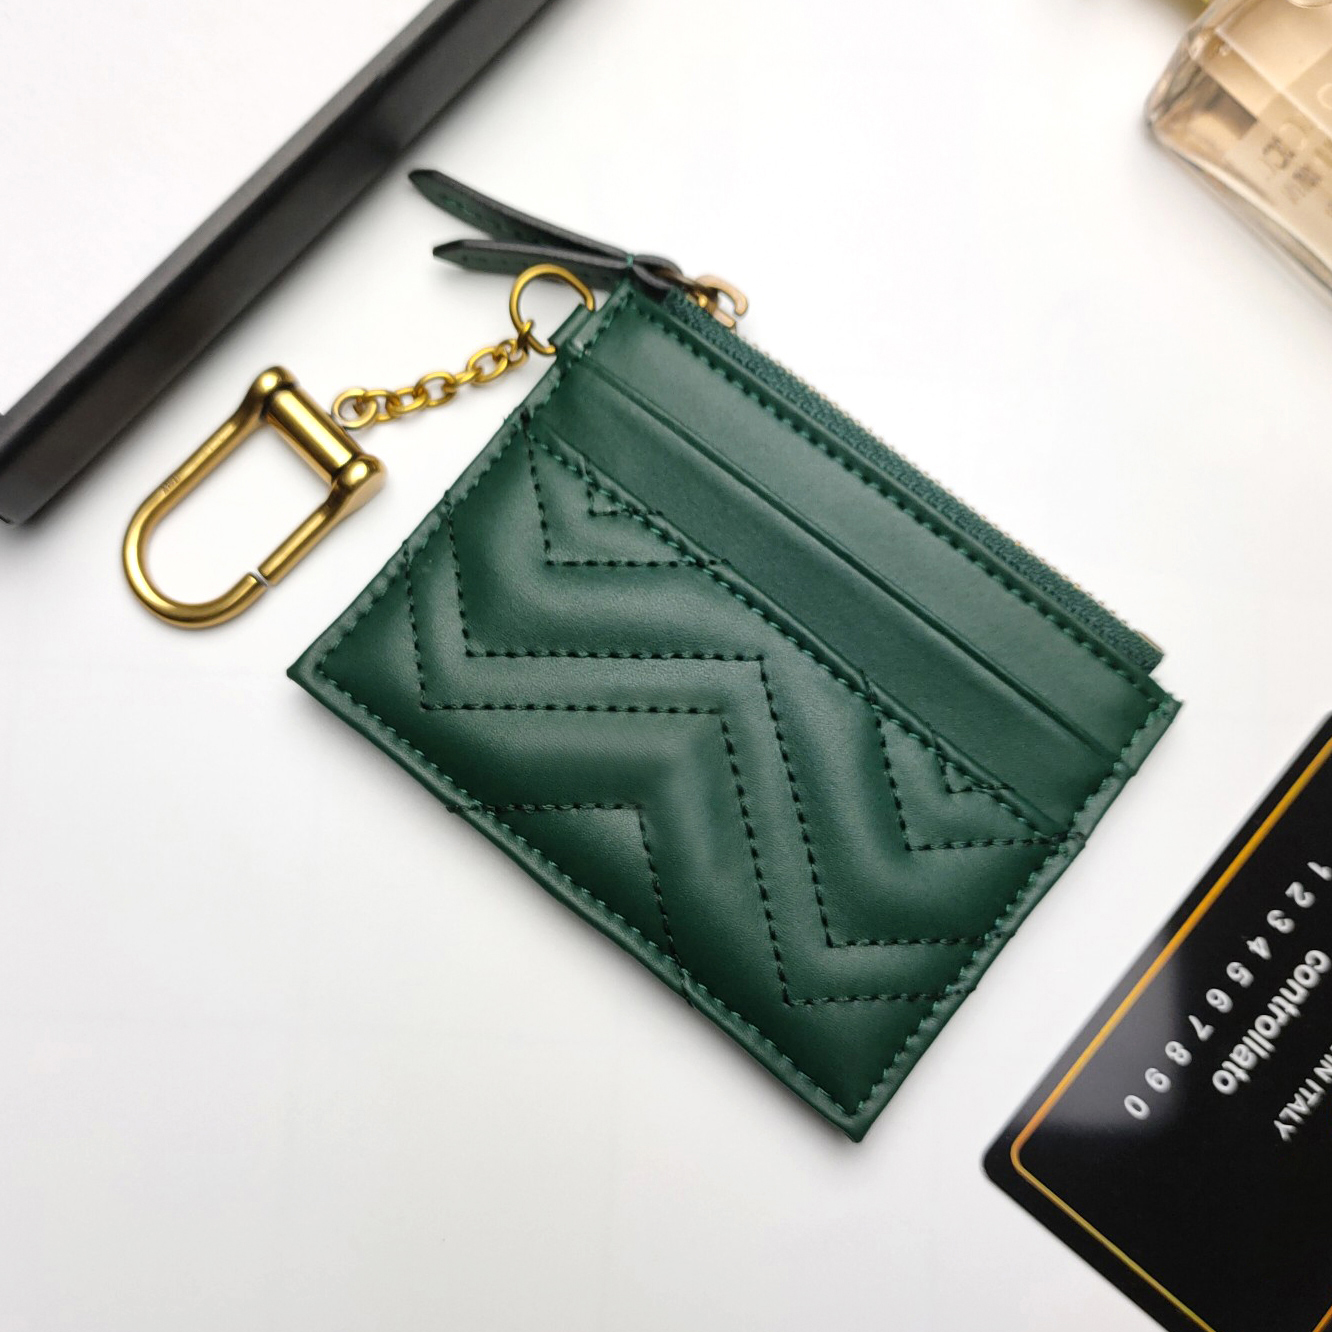 Real Leather Luxury Designer Cards Holder Coin Purse Fashion Women Mini Wallet Cards Bag Key Pouch Luxury Card Bank Card Holder Holder Sedel CLIP ZIPPER POUCH MED BOX